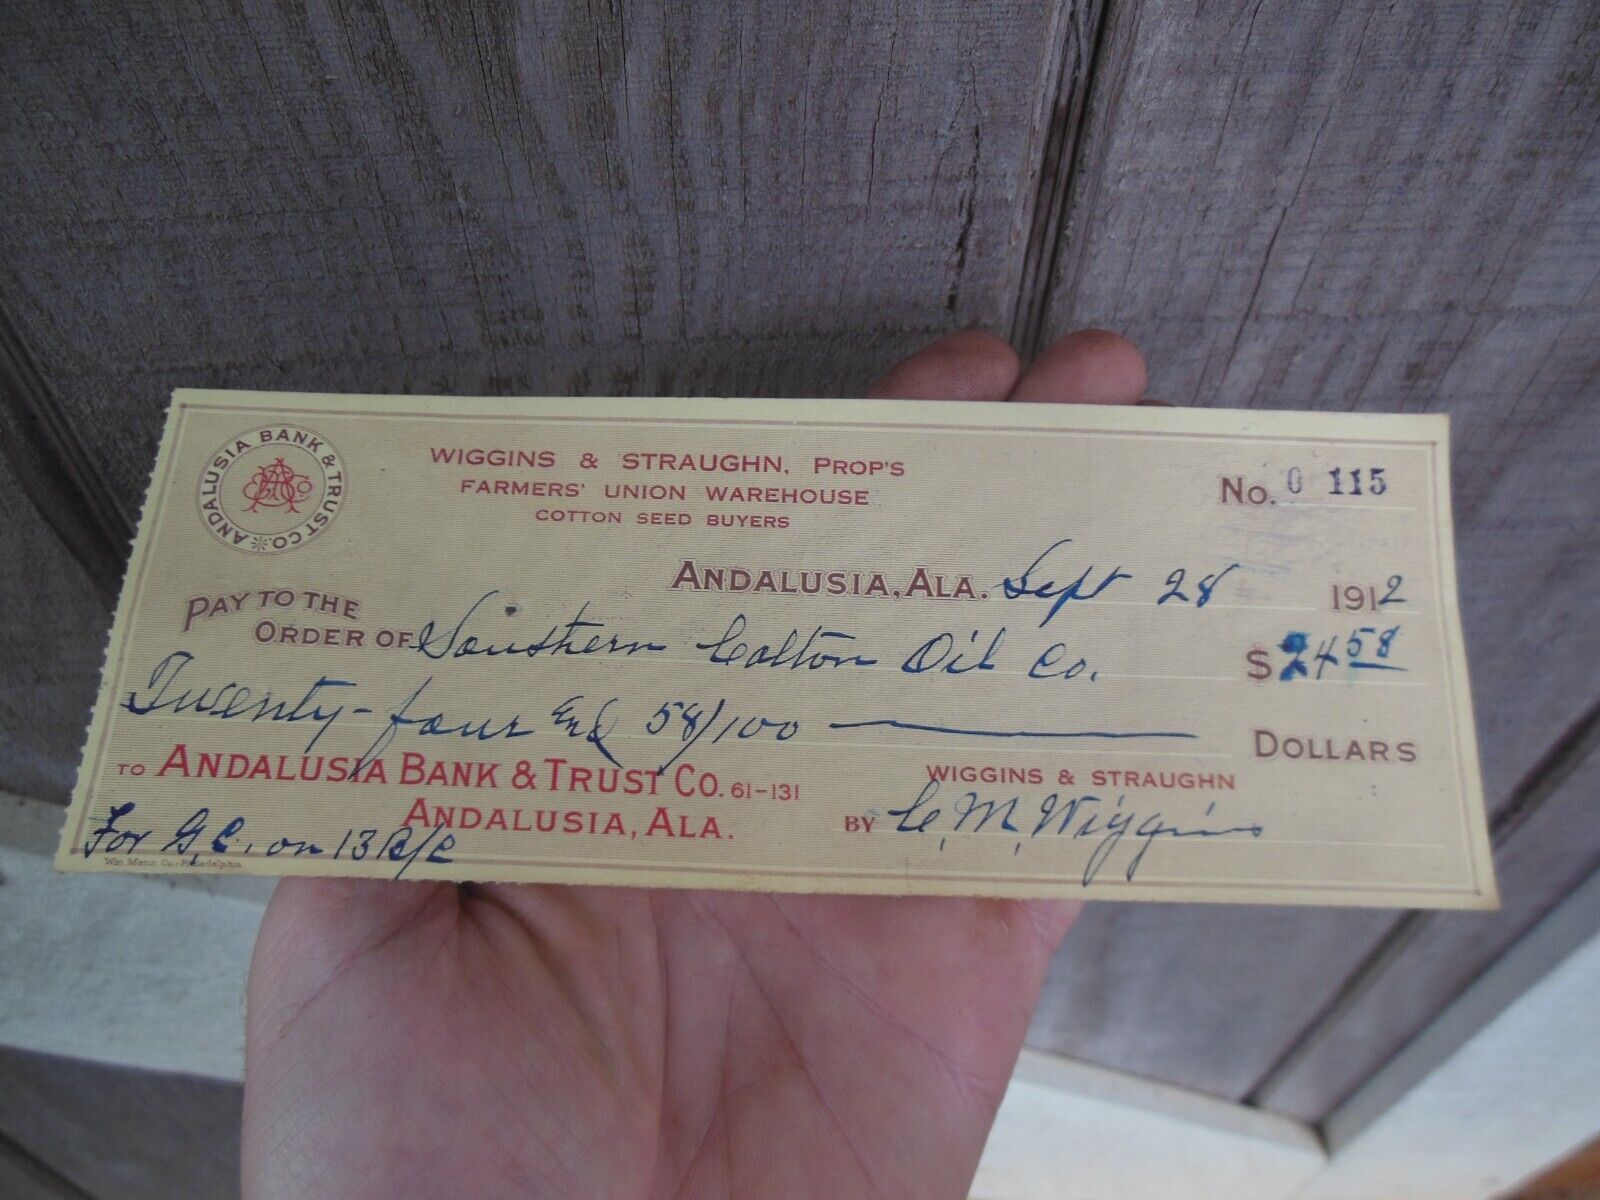 1912 Andalusia Alabama Bank Trust Southern Cotton Oil Co Seed Buyers Receipt